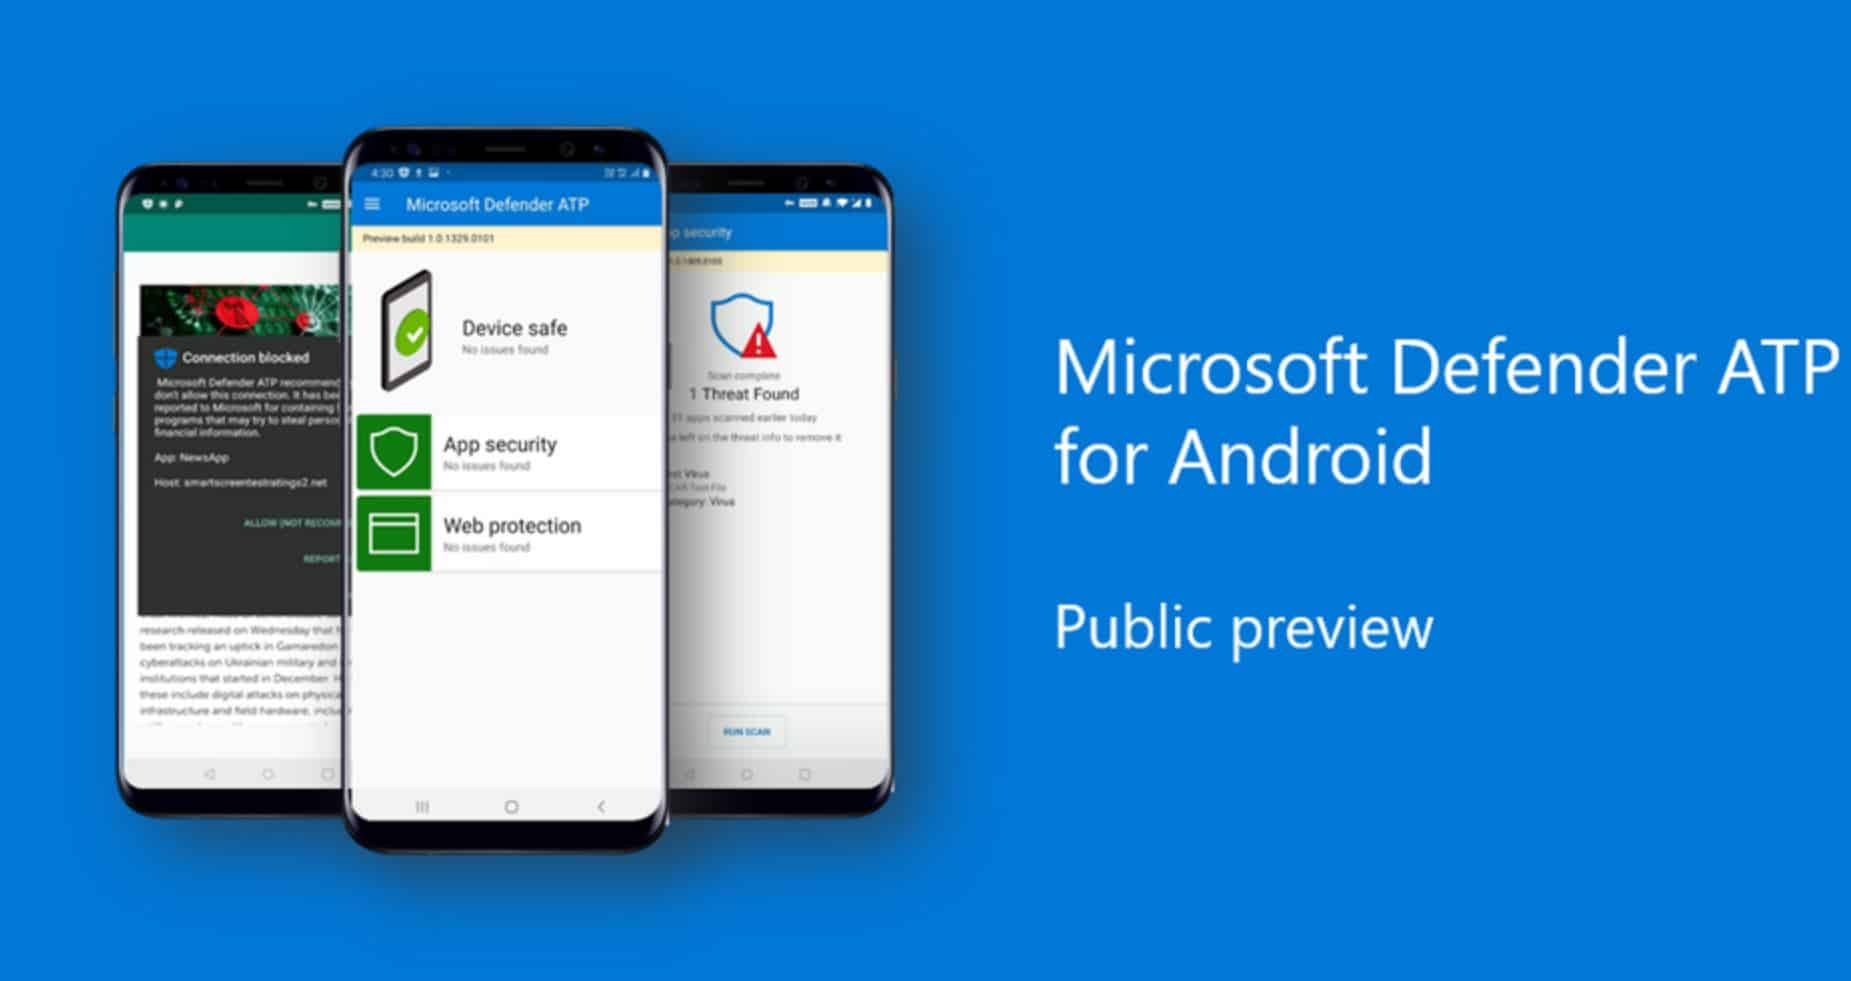 Microsoft Defender ATP for Android devices now available in the Google Play Store